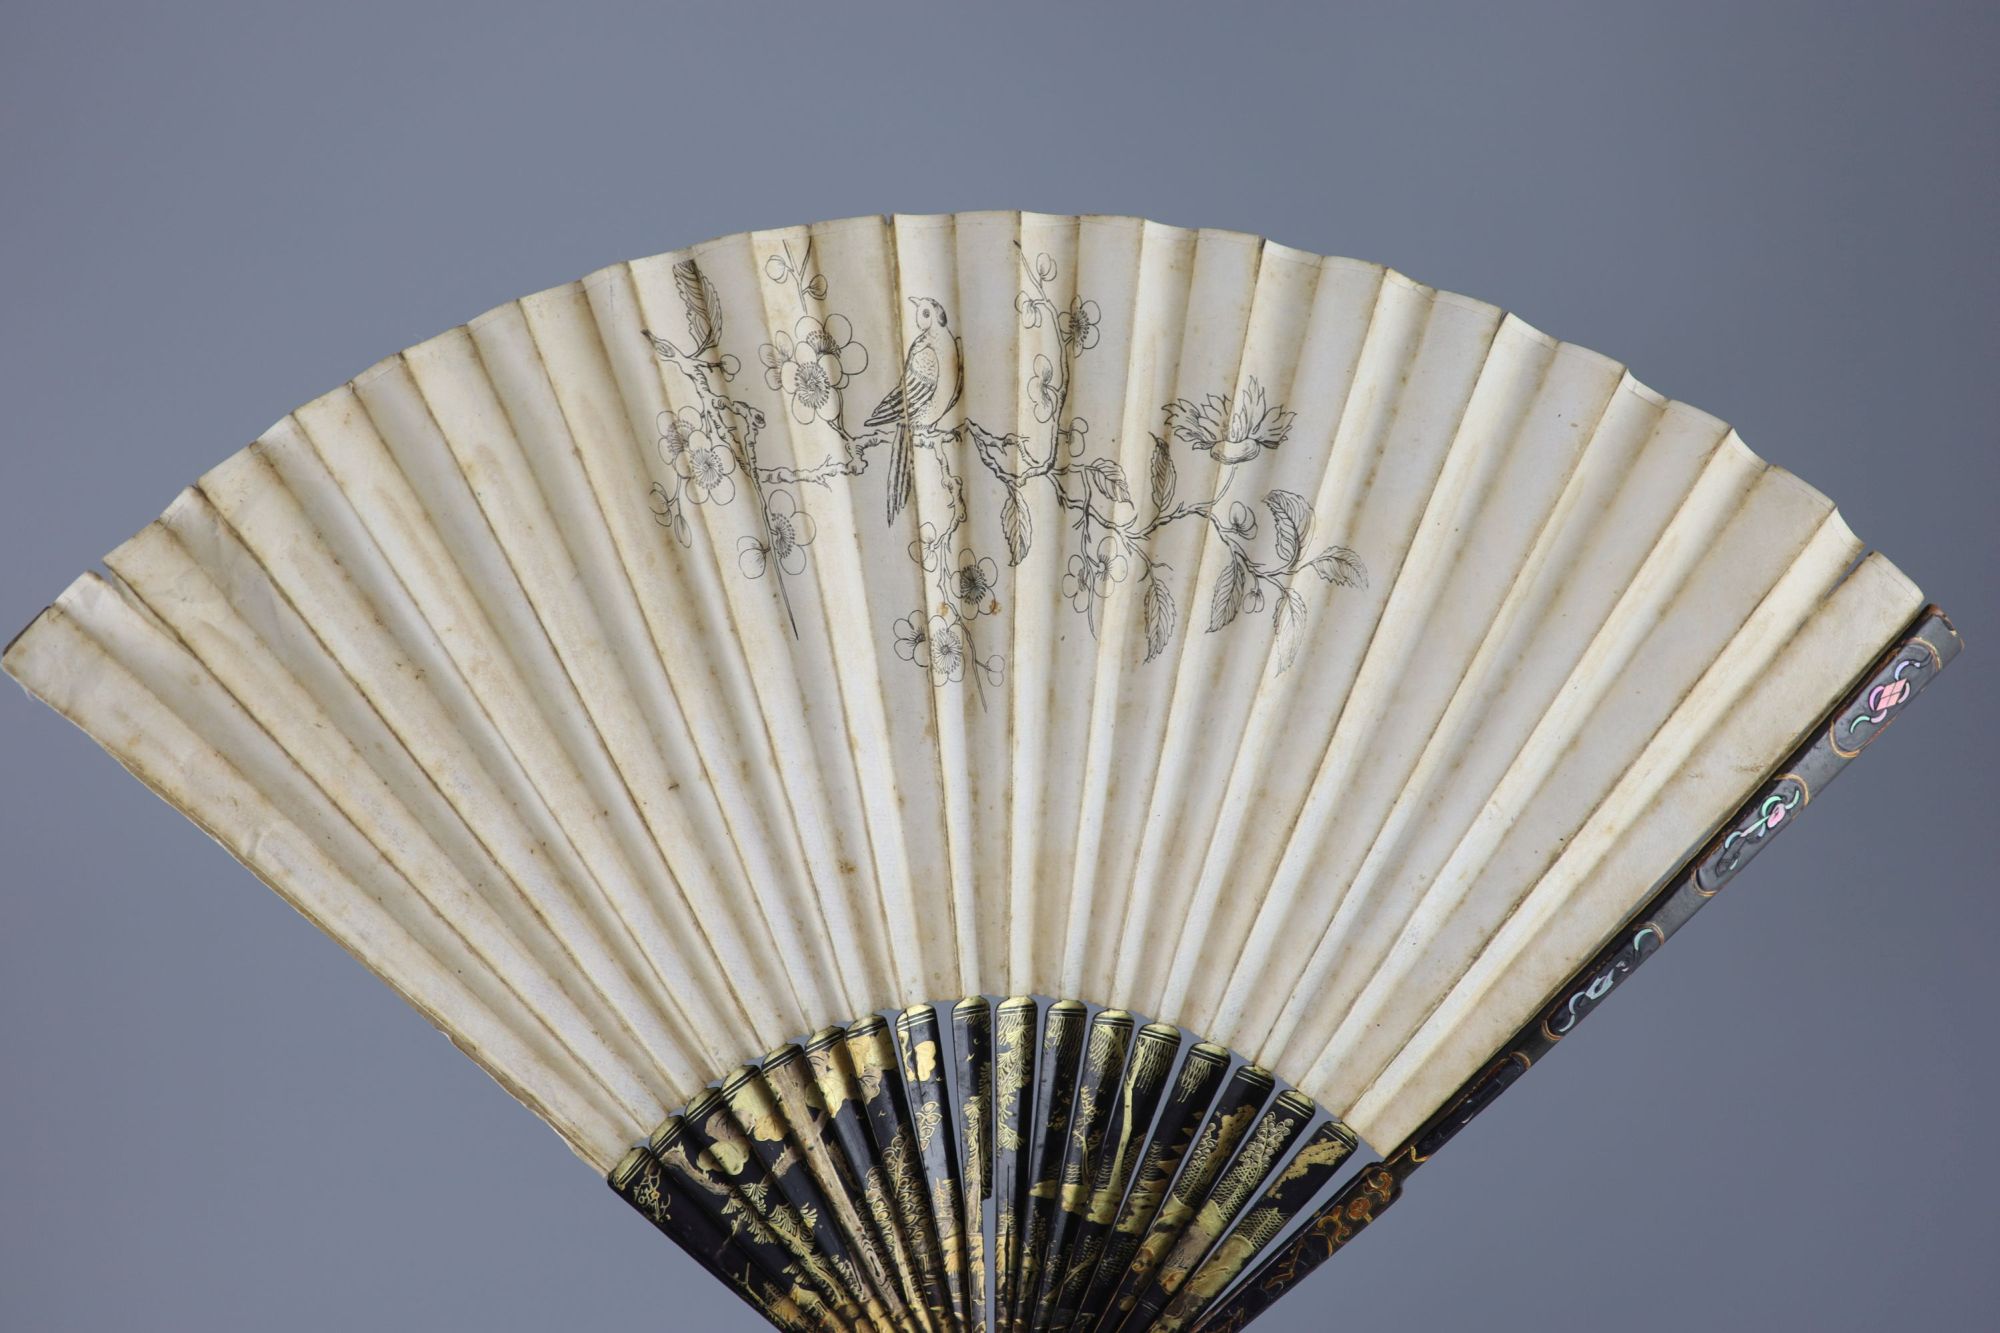 An English painted paper and lacquer fan, late 18th century and a 19th century Chinese embroidered silk purse